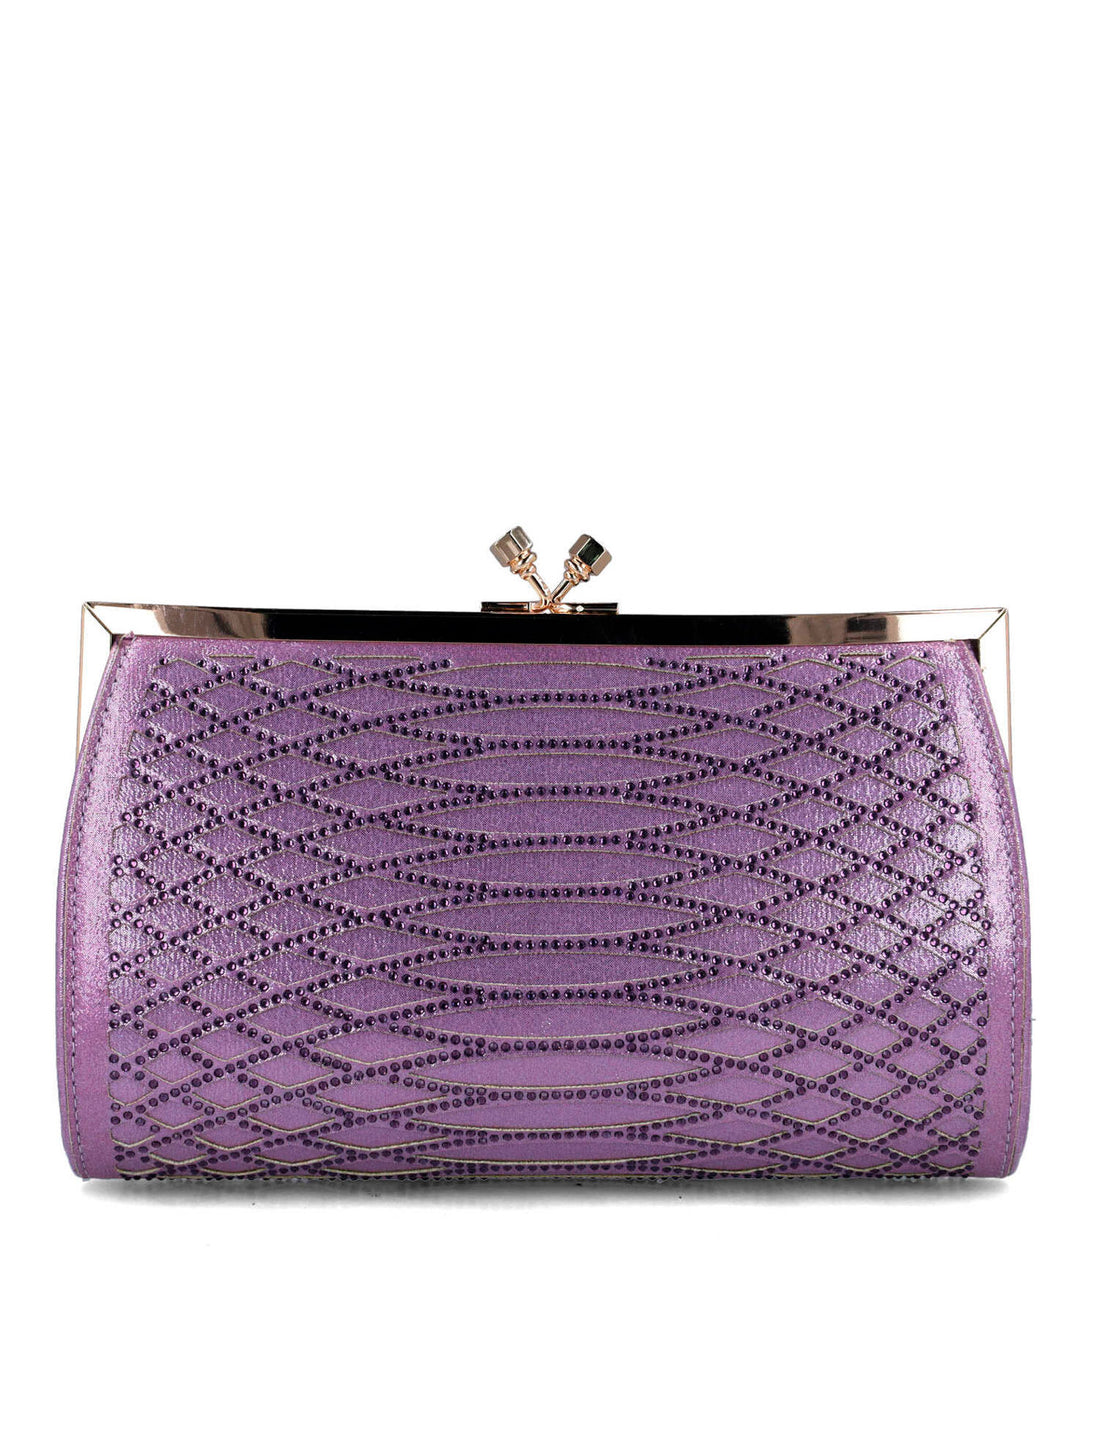 Purple Clutch In Imitation Snake Leather_85597_80_01